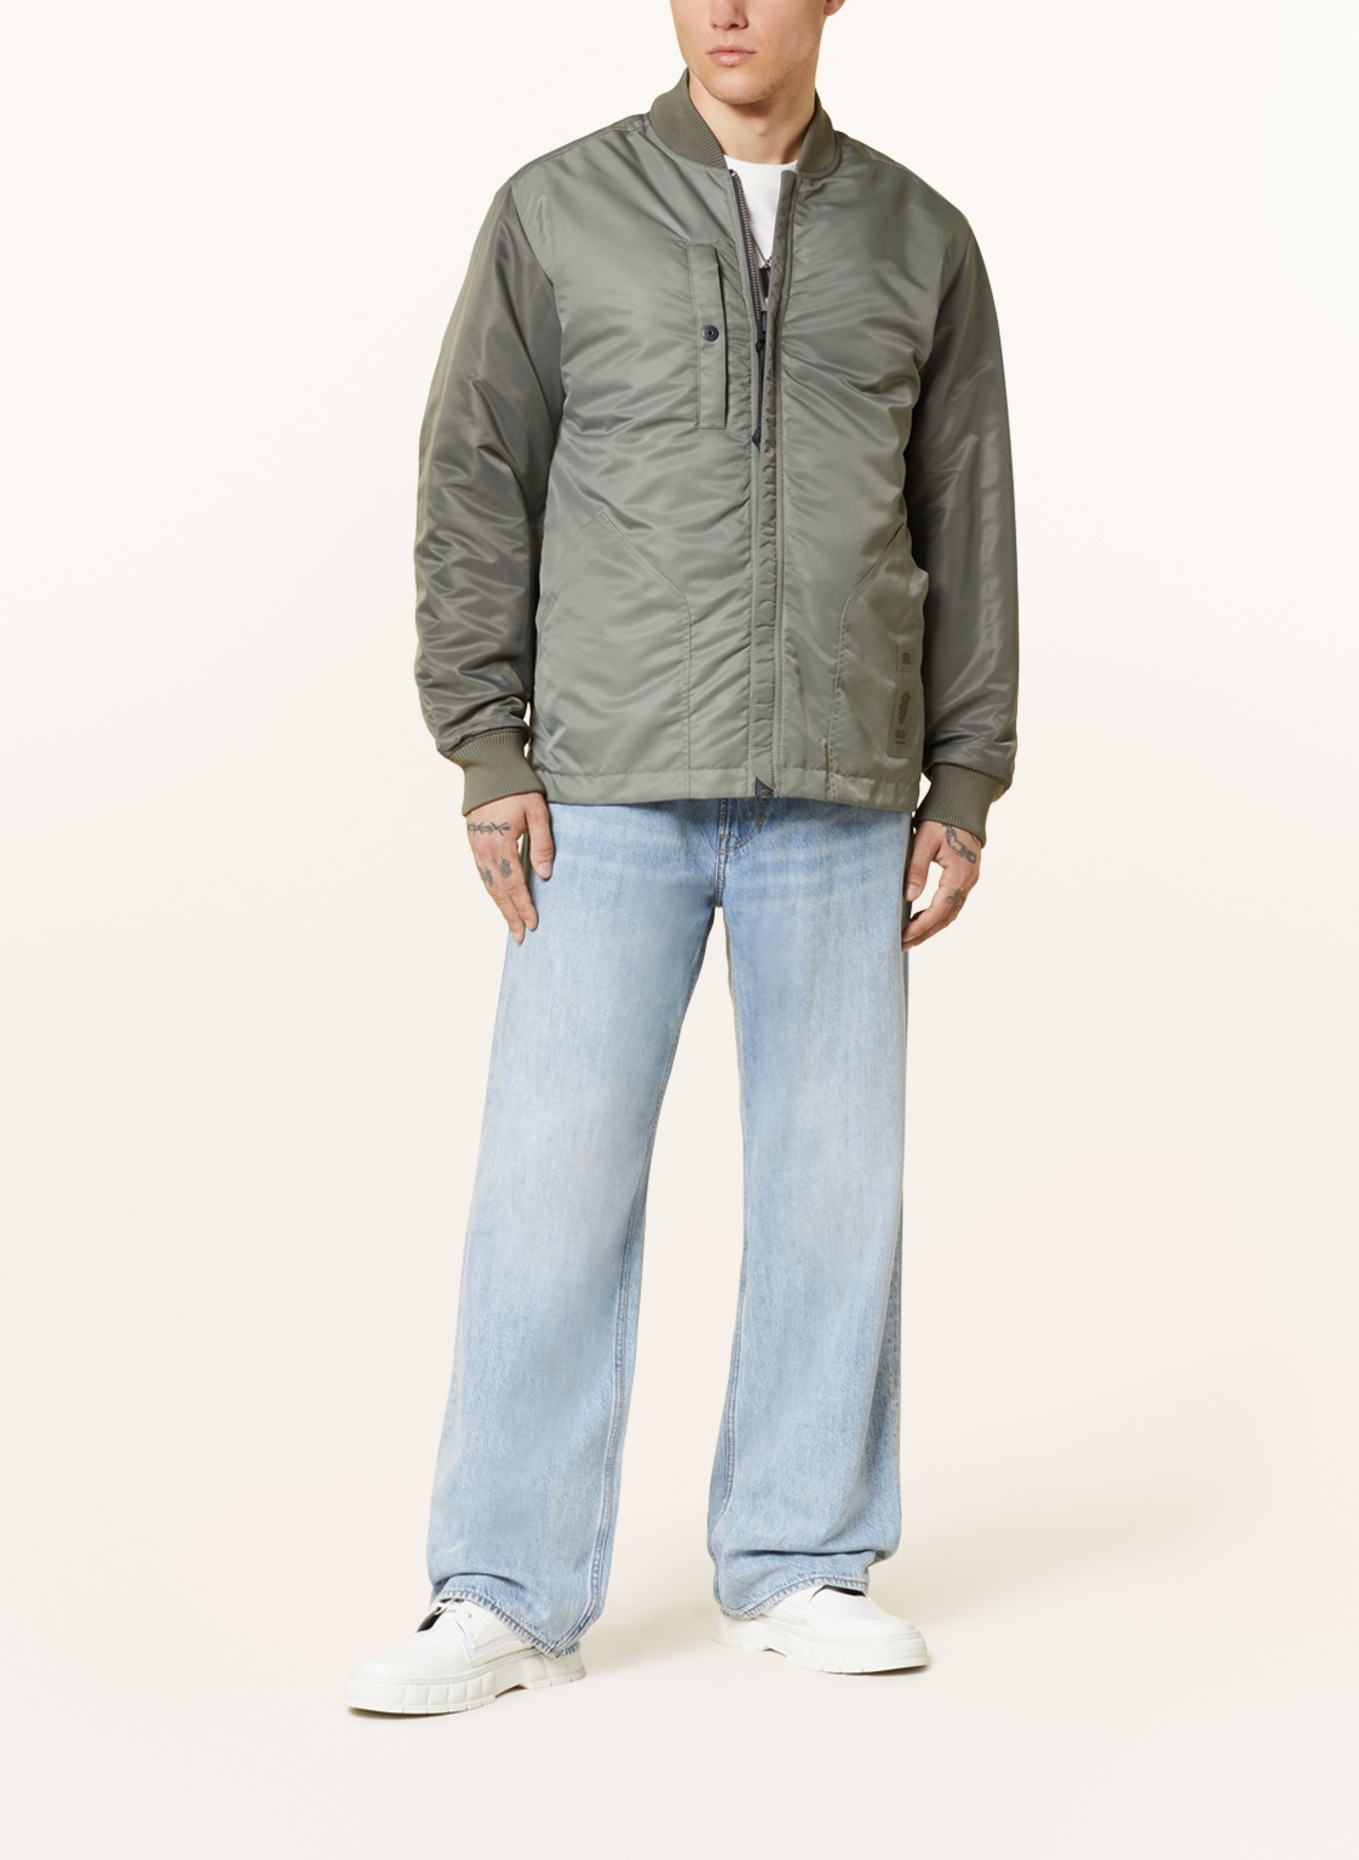 G-Star RAW Reversible bomber jacket DECK, Color: GRAY (Image 2)